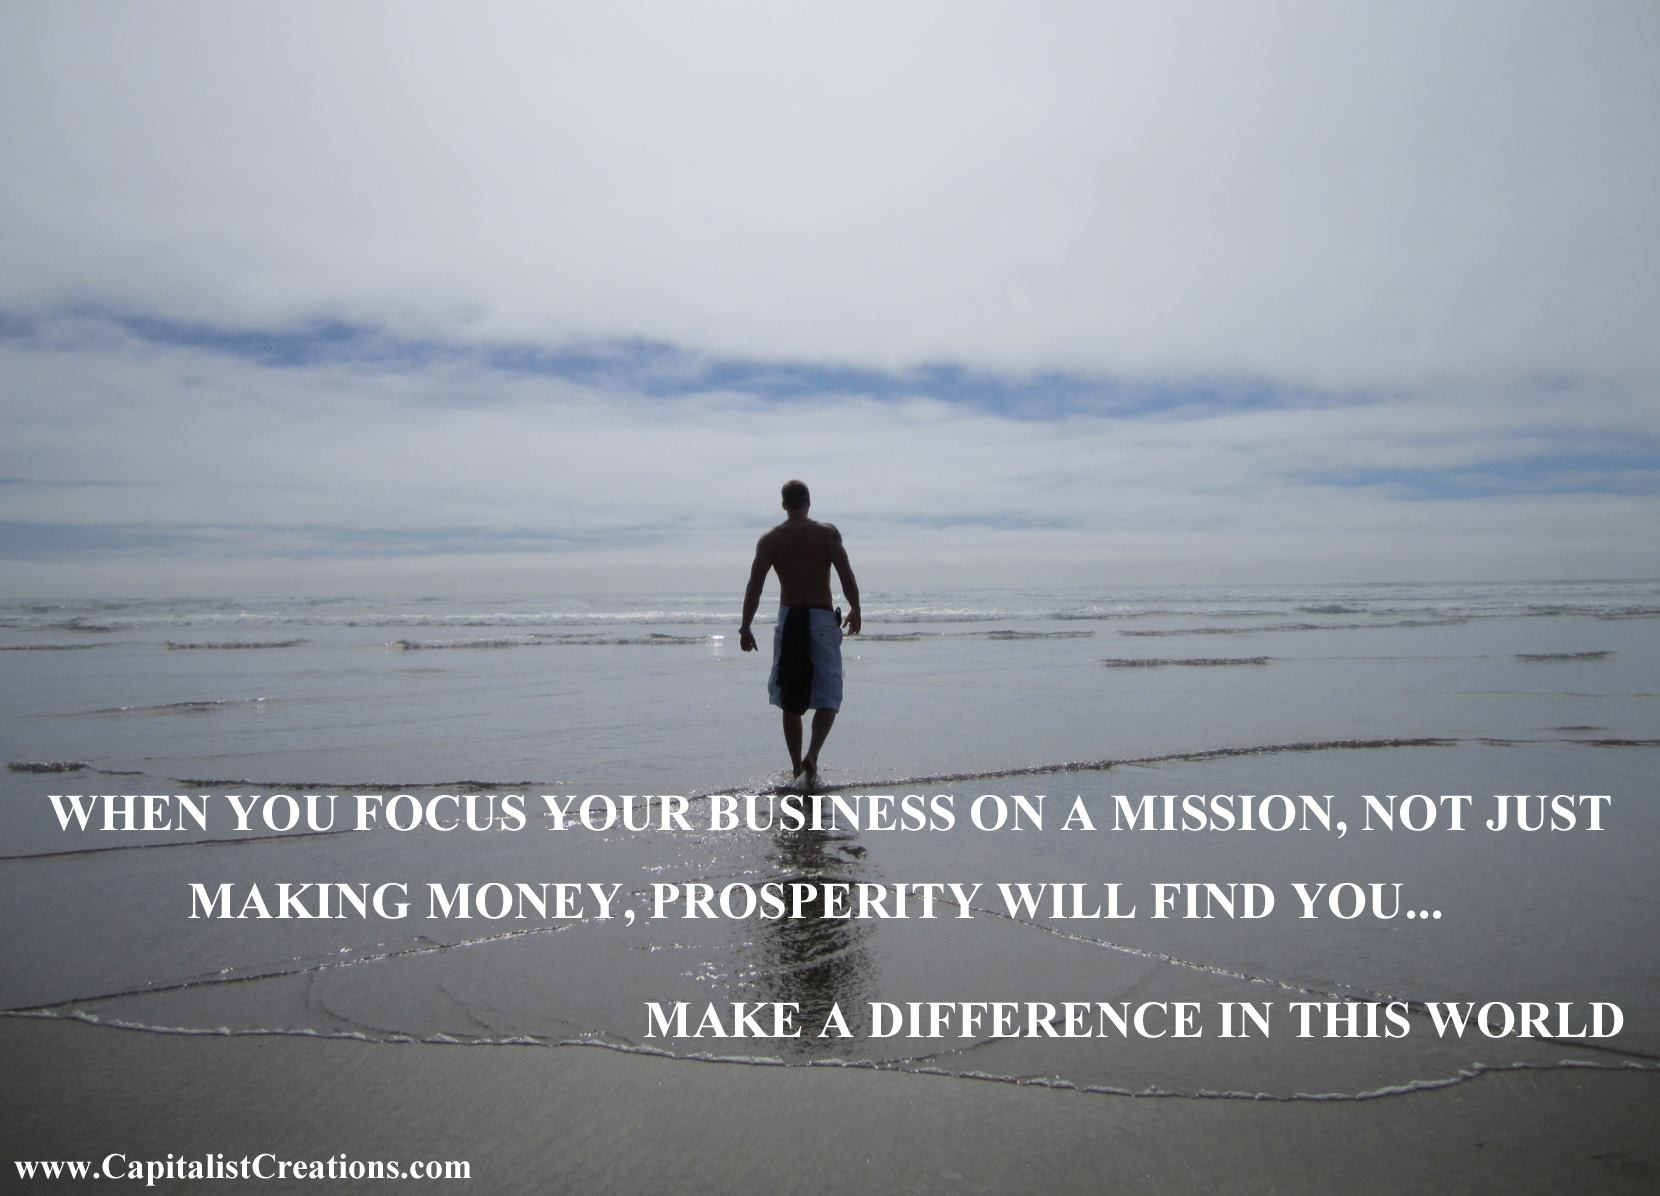 Inspirational Quote For Entrepreneur
 Top 10 Motivational Picture Quotes for Entrepreneurs